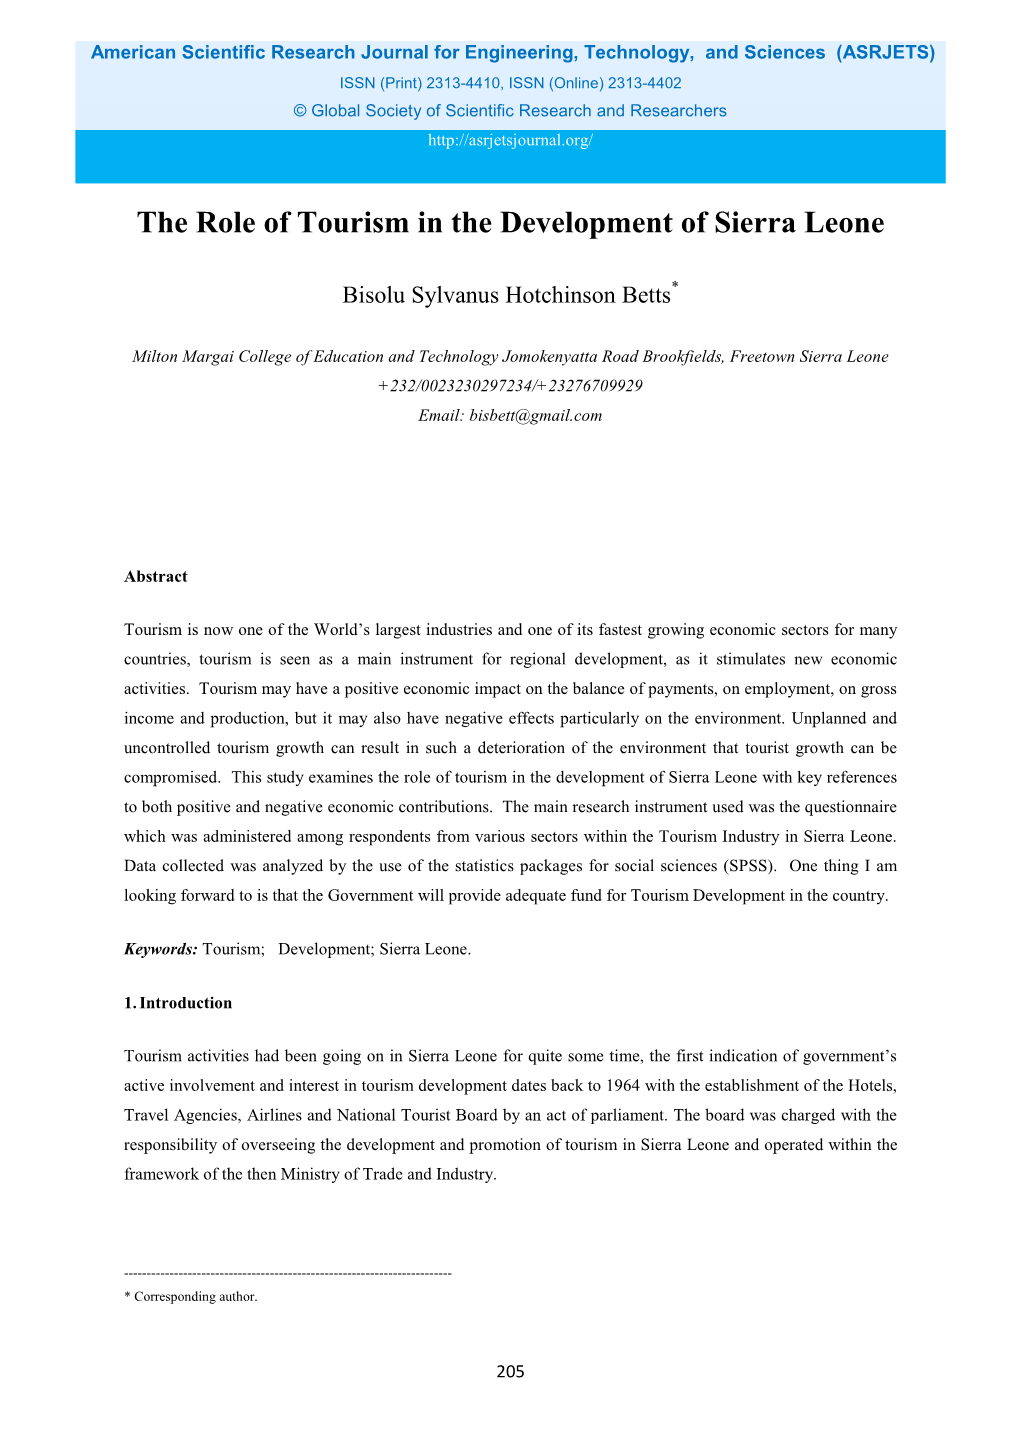 The Role of Tourism in the Development of Sierra Leone